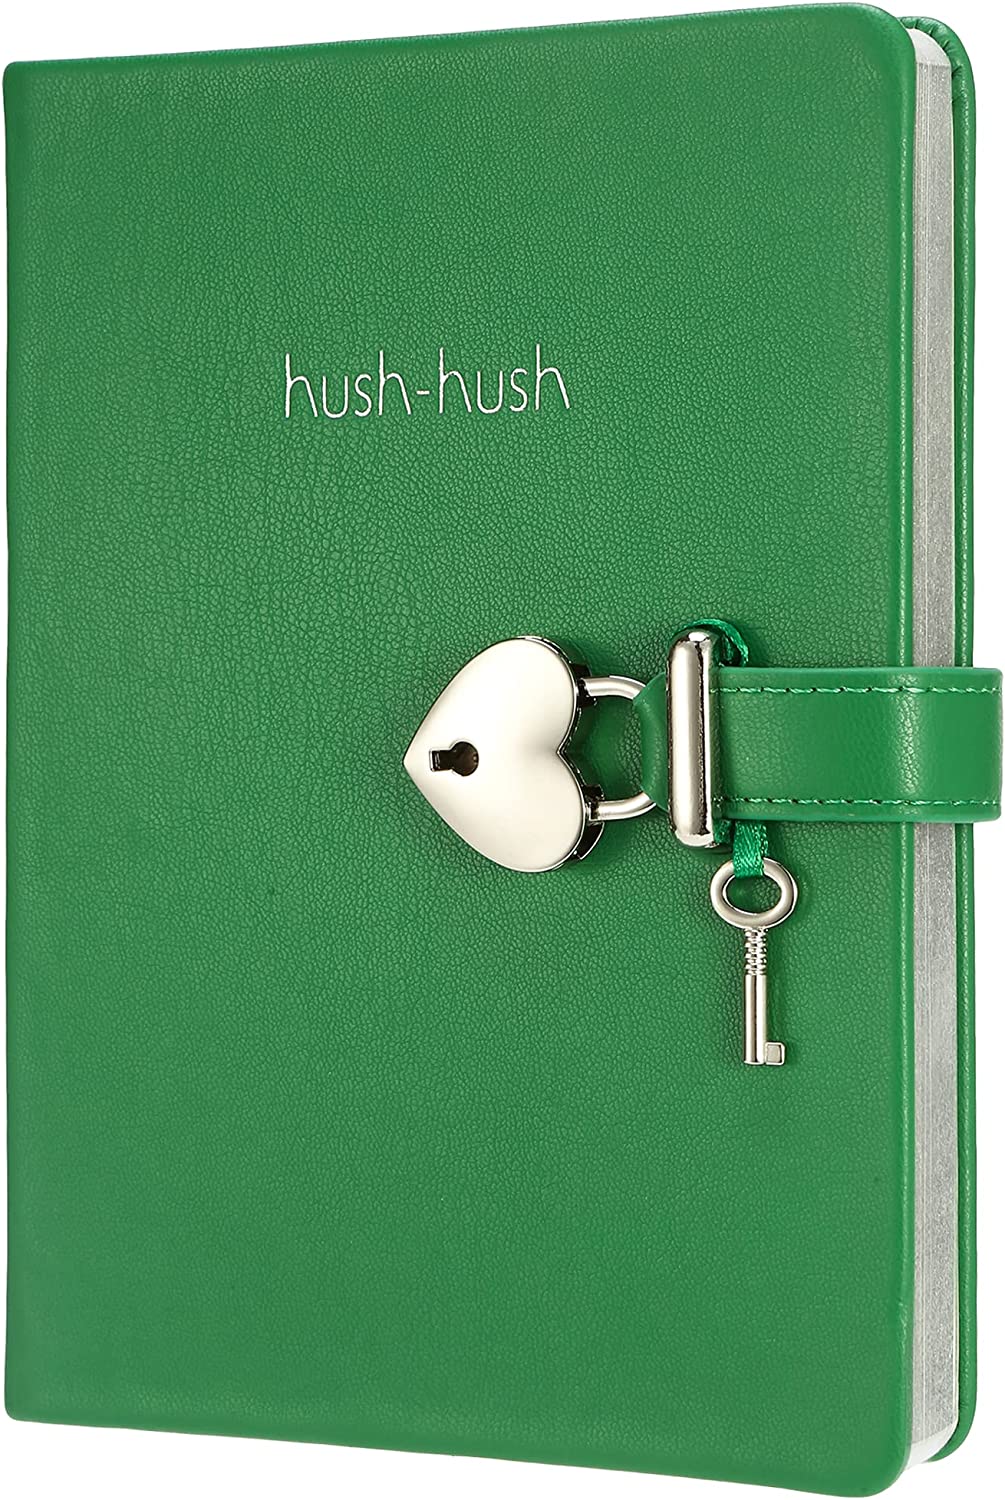 Heart Shaped Lock Journal, Lock Diary for Girls with Key, Vegan Leather Cover, Cute Locking Secret Notebook for Teens, 5.3x7.3",320p Victoria's Journals Secret Diary, College-ruled (Forest Green)